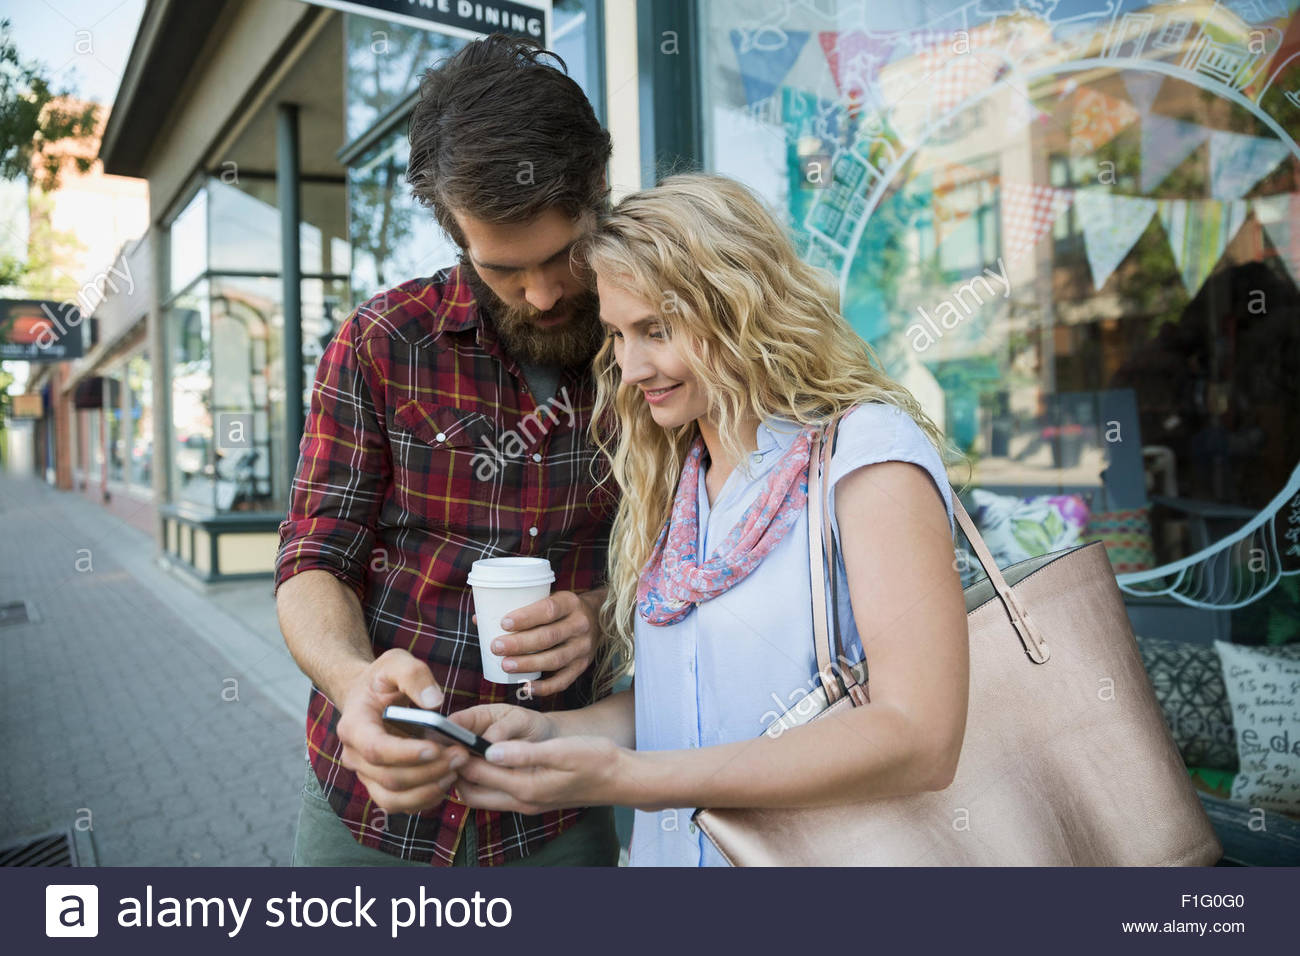 Couple texting with cell phone outside storefront Stock Photo